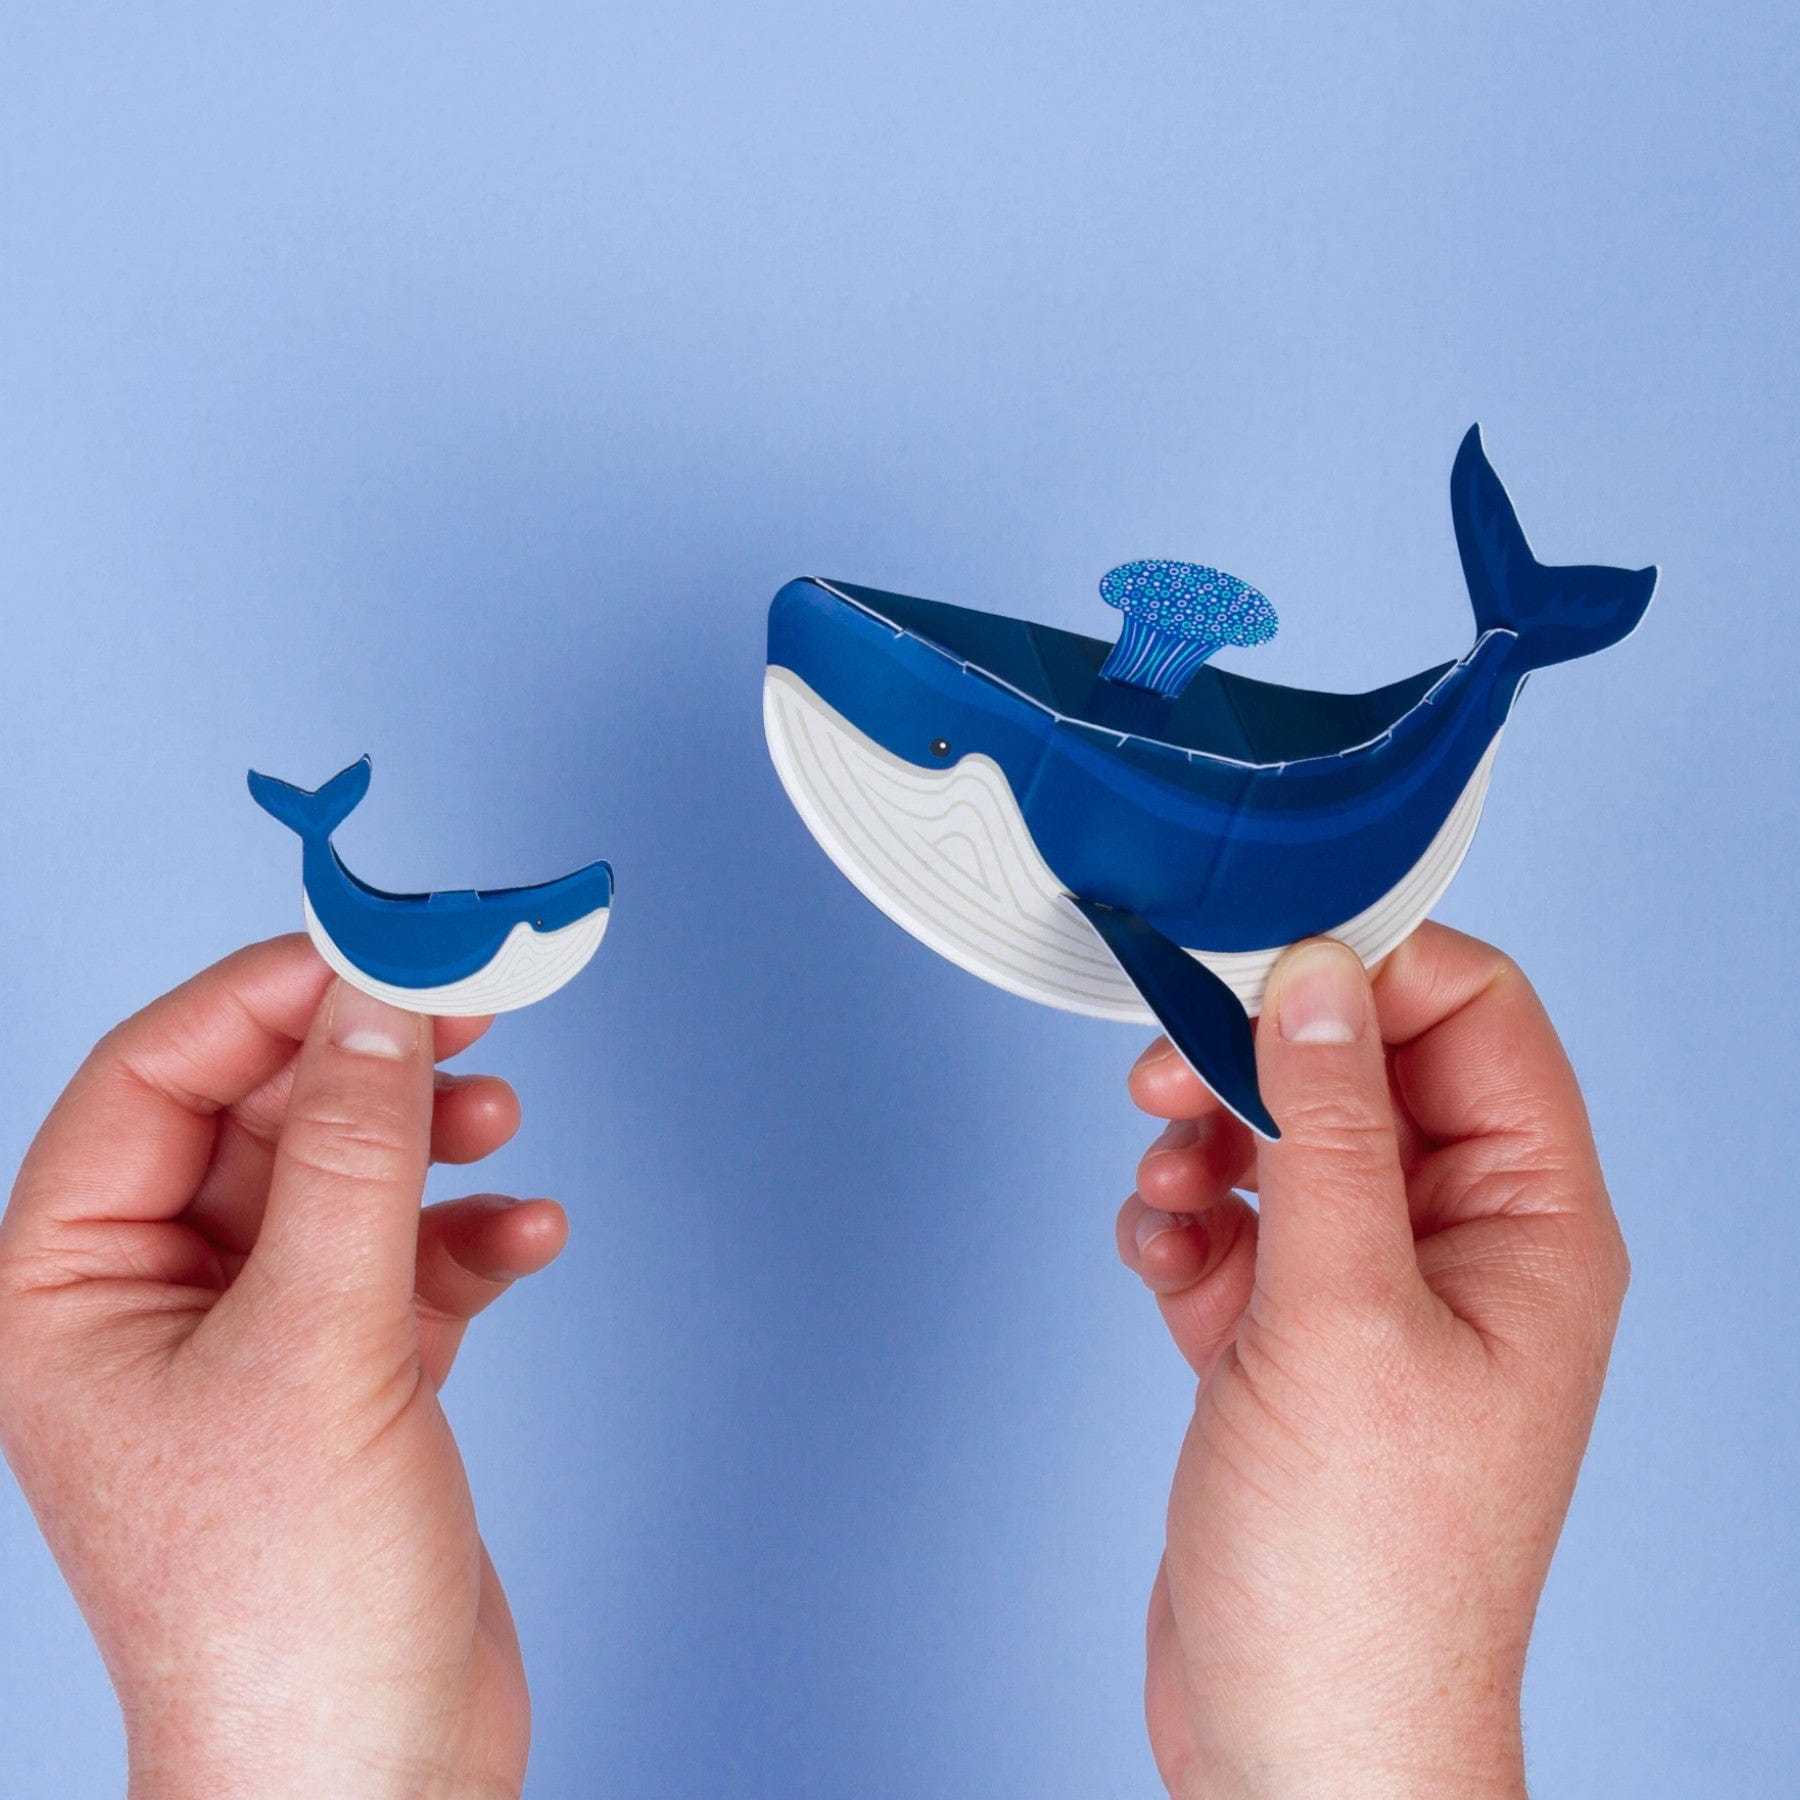 Hands holding cut-out paper art of a whale with a flip-open head revealing colorful coral inside against a blue background